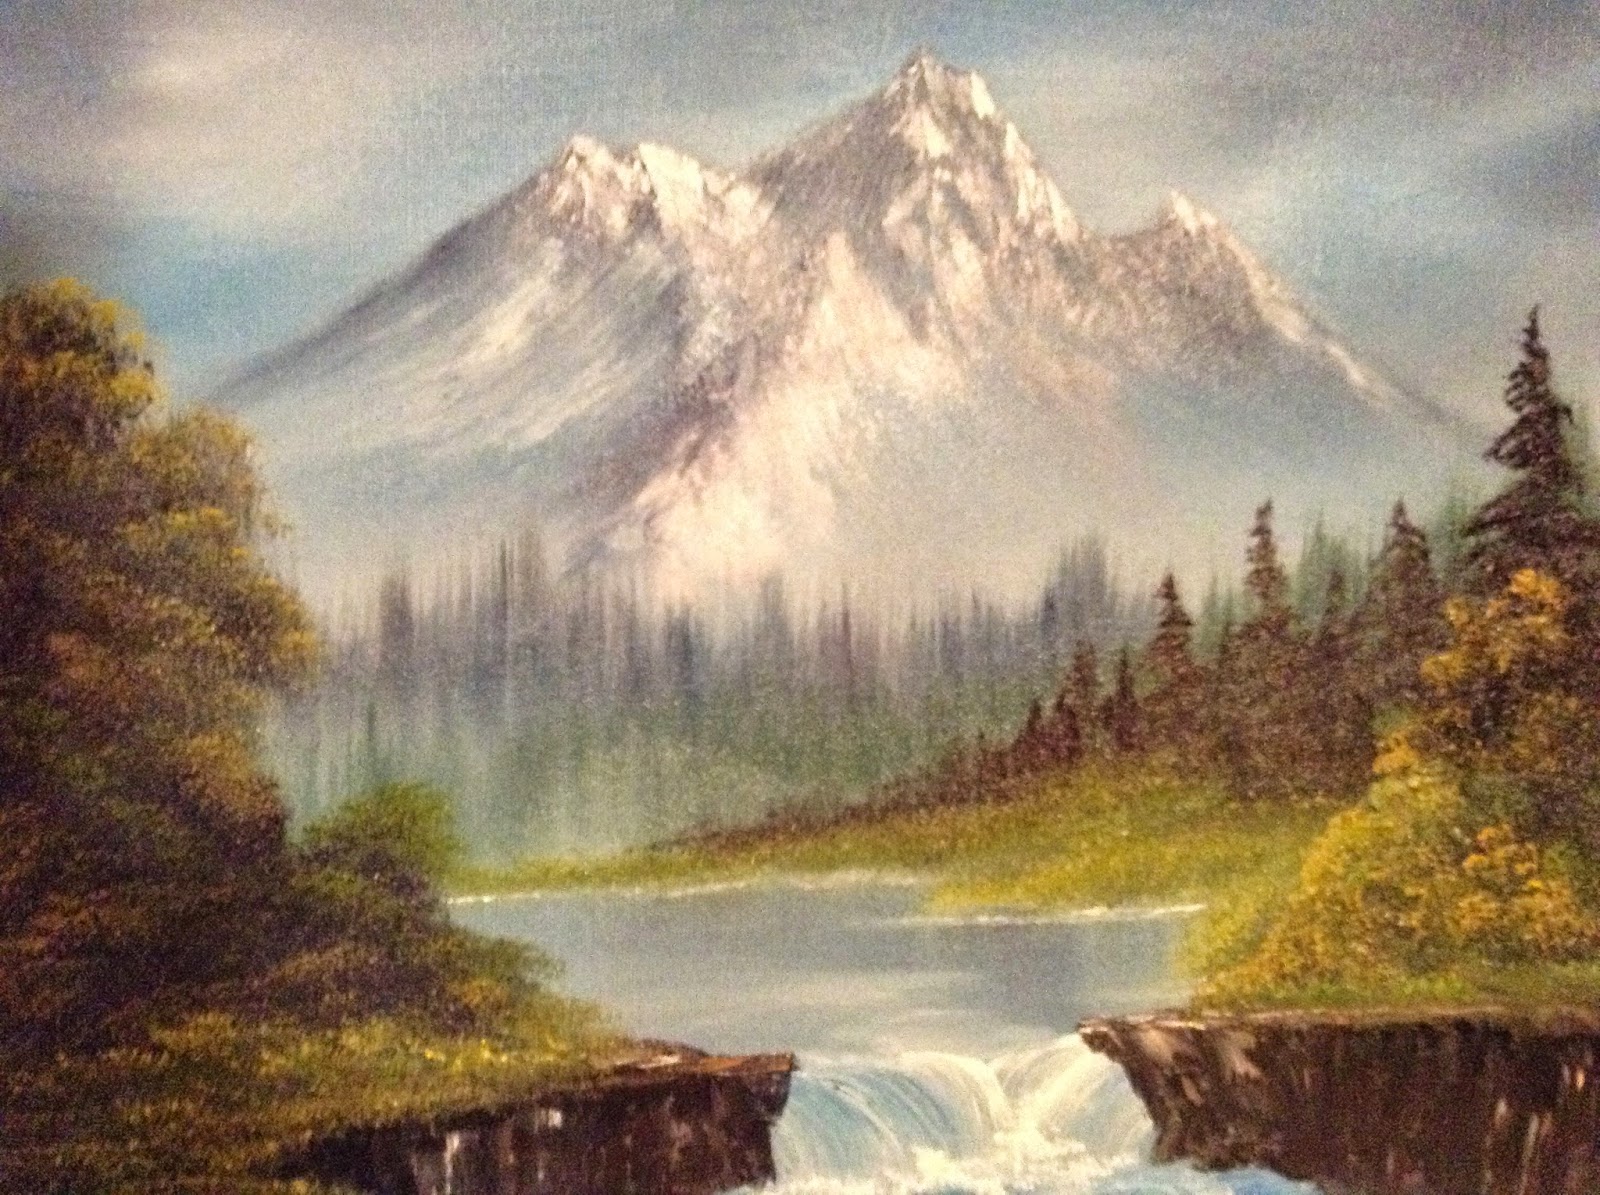 Don BelikBob Ross ® Painting Classes Gallery Young.